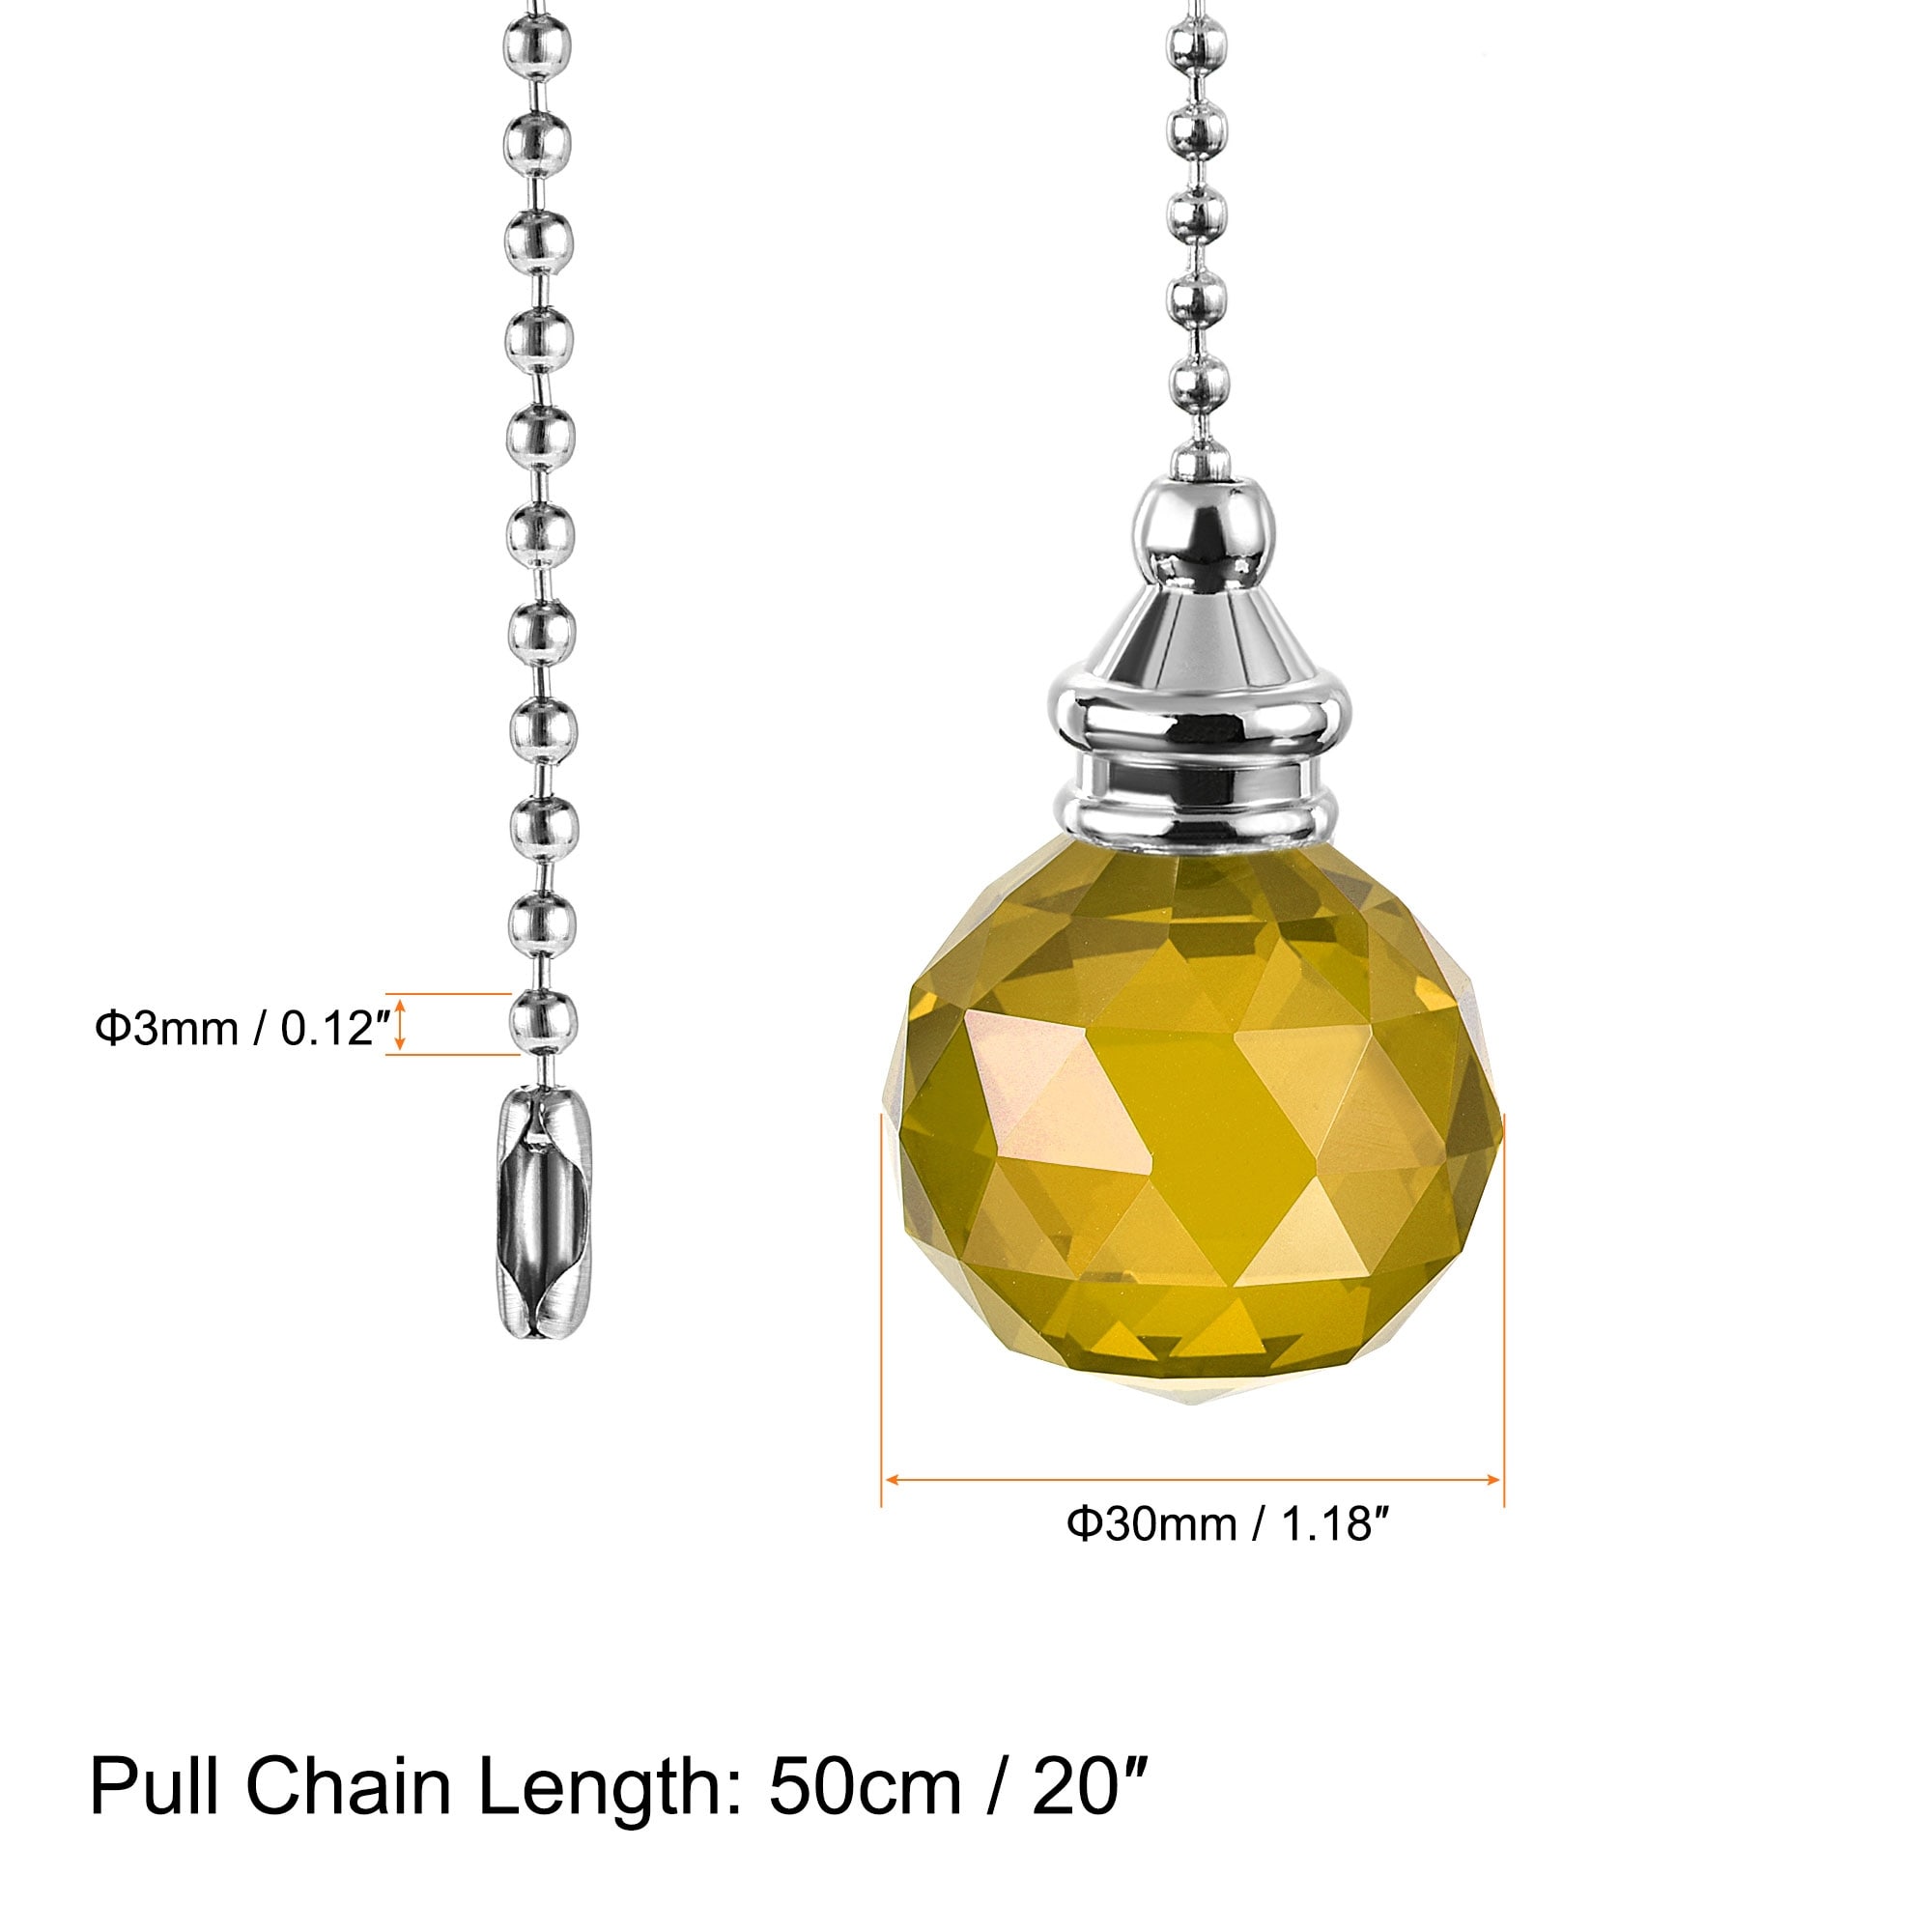 20 Inch Ceiling Fan Pull Chain Extension 30mm Crystal Bubble Ball